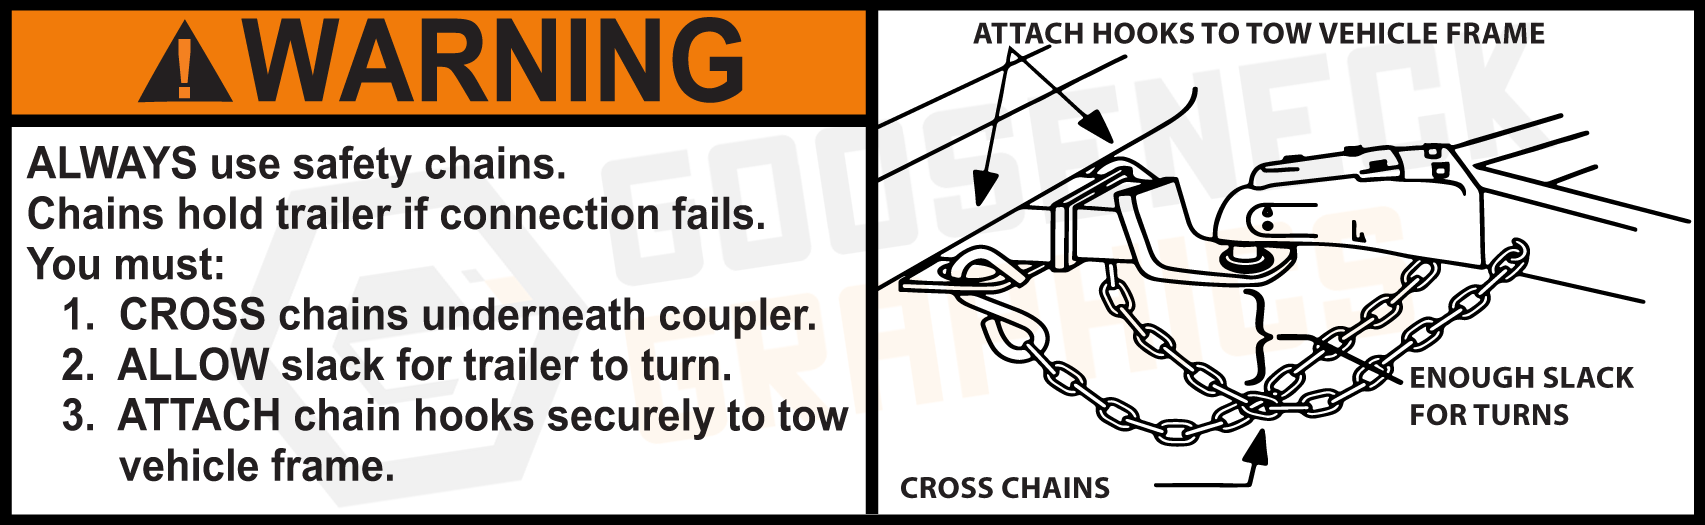 D-121 Always use safety chains<br />
